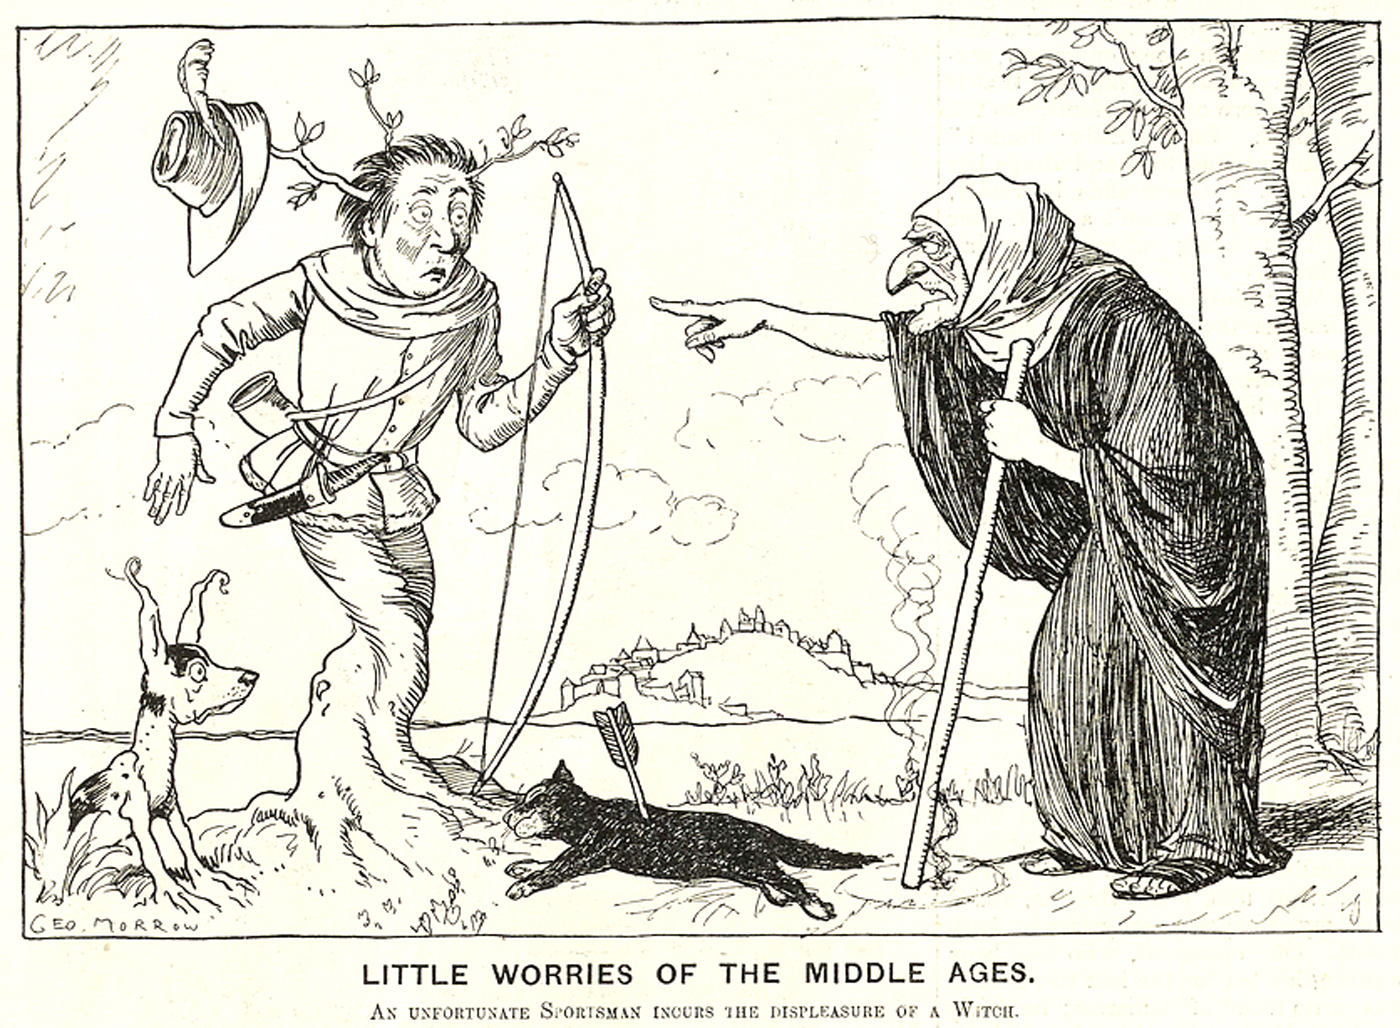 Little Worries of the Middle Ages. An unfortunate sportsman incurs the displeasure of a witch. © Punch Ltd